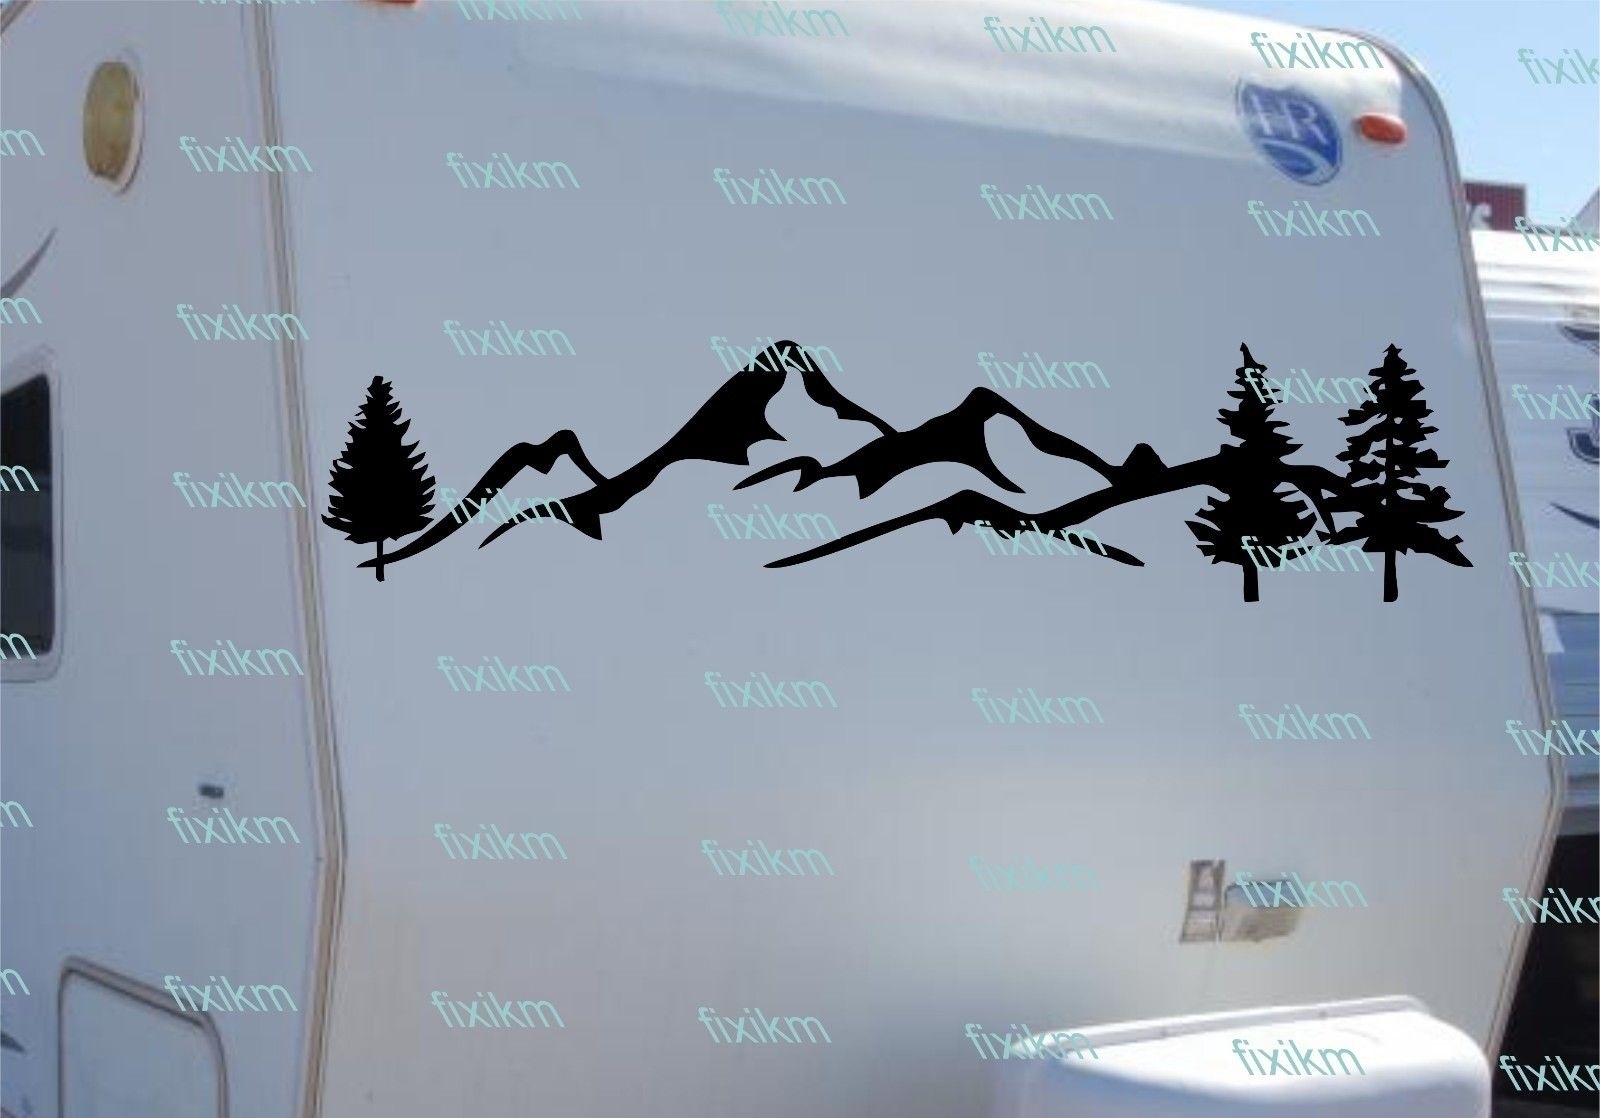 For 1Set/2Pcs Mountain forest tree graphic vinyl decal any size for RV, Trailer, Camper, Truck